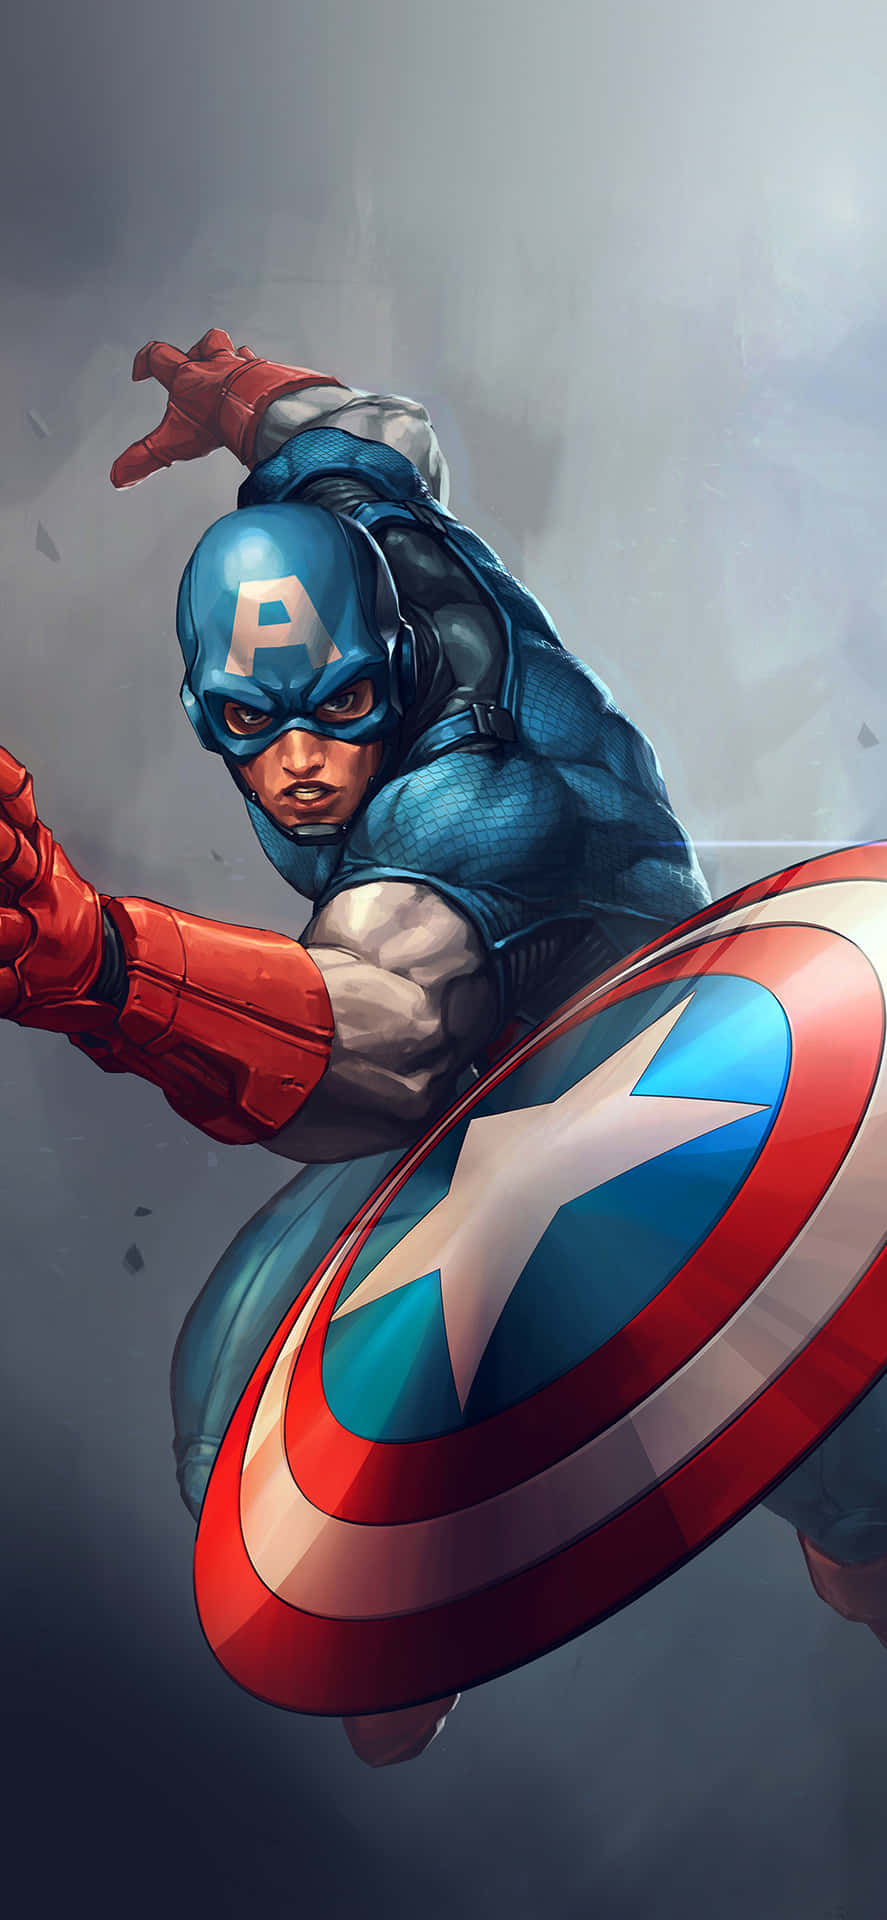 Captain America is the epitome of cool Wallpaper